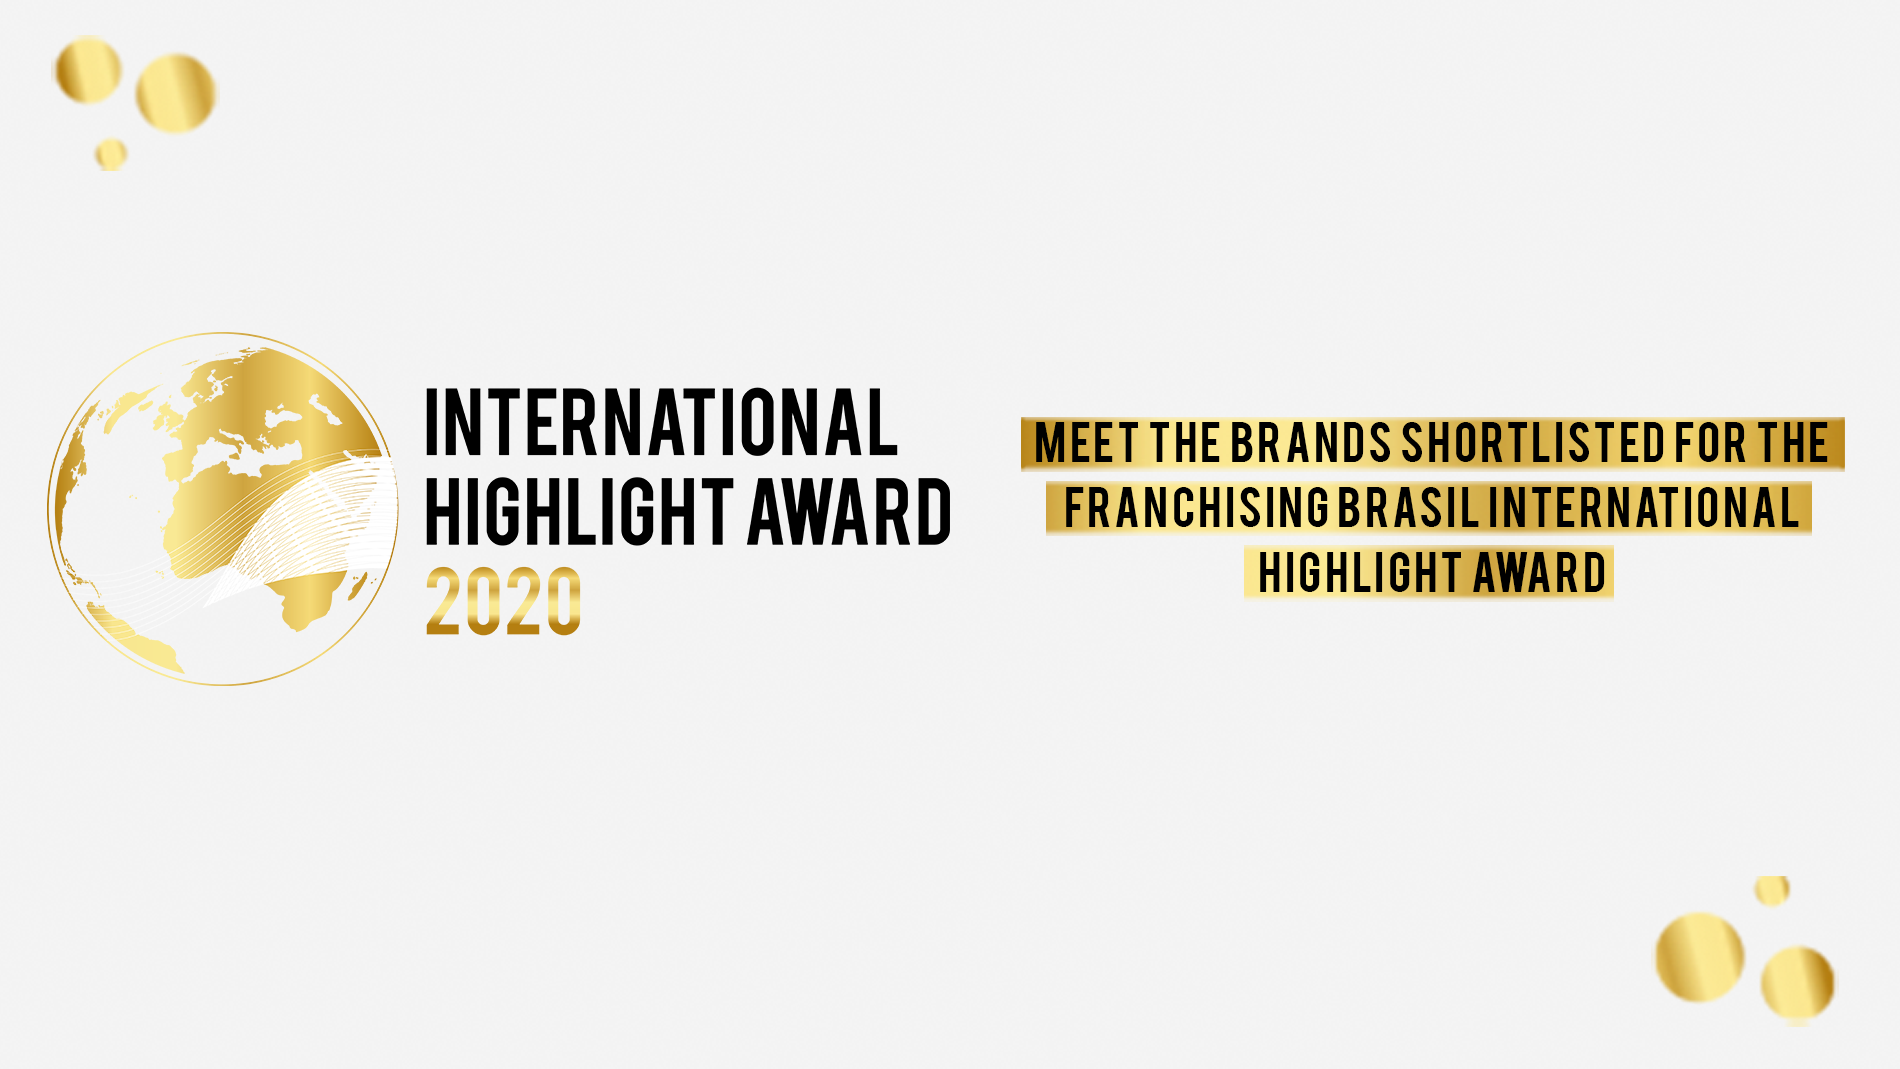 Meet the shortlisted brands nominated for the International Highlight Award